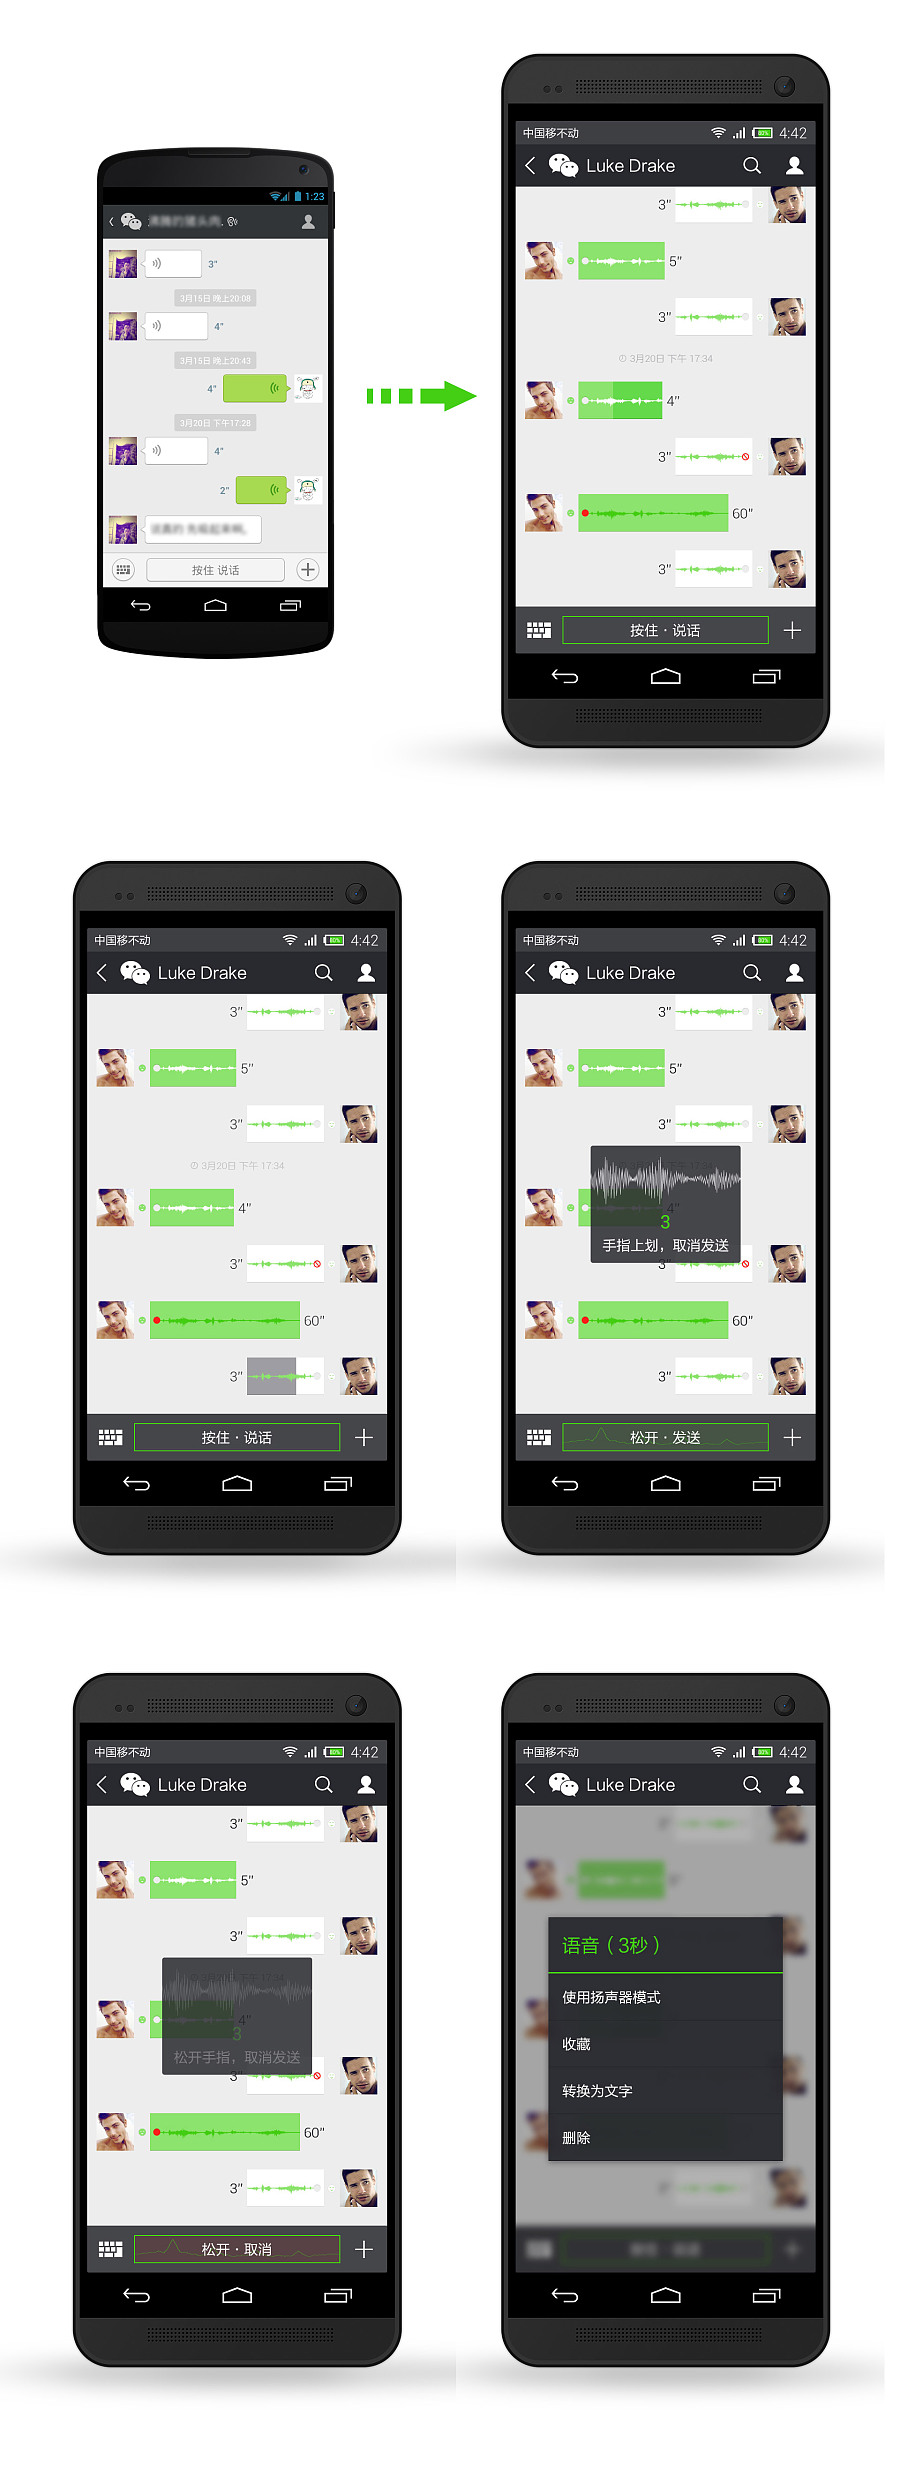 Redesign-微信\/WeChat for Android4.0|移动设备